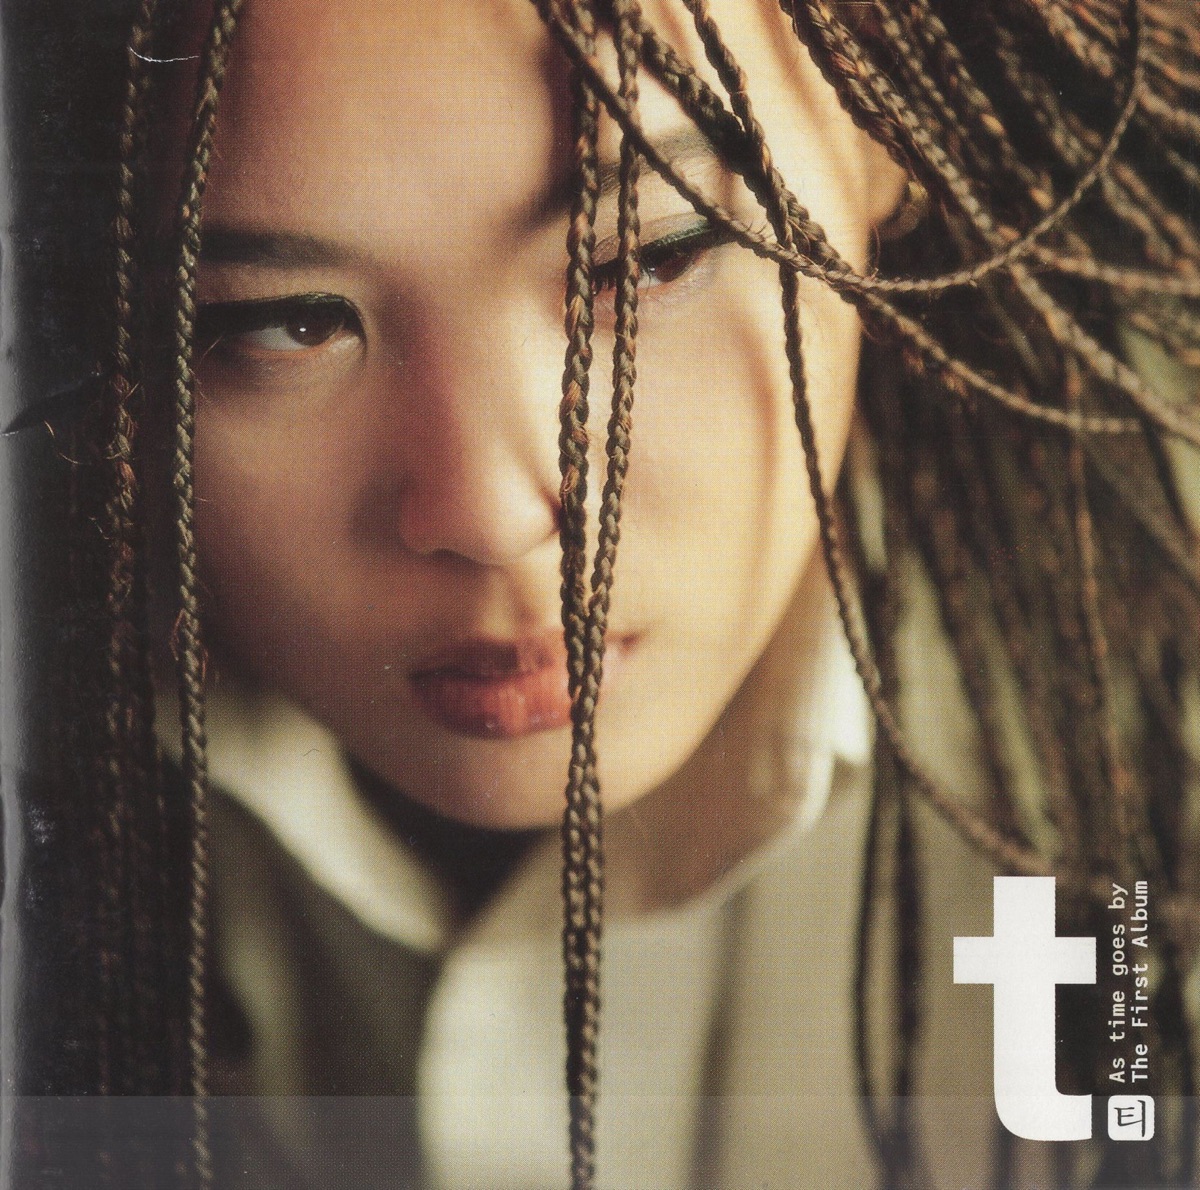 YOON MI RAE – As Time Goes By